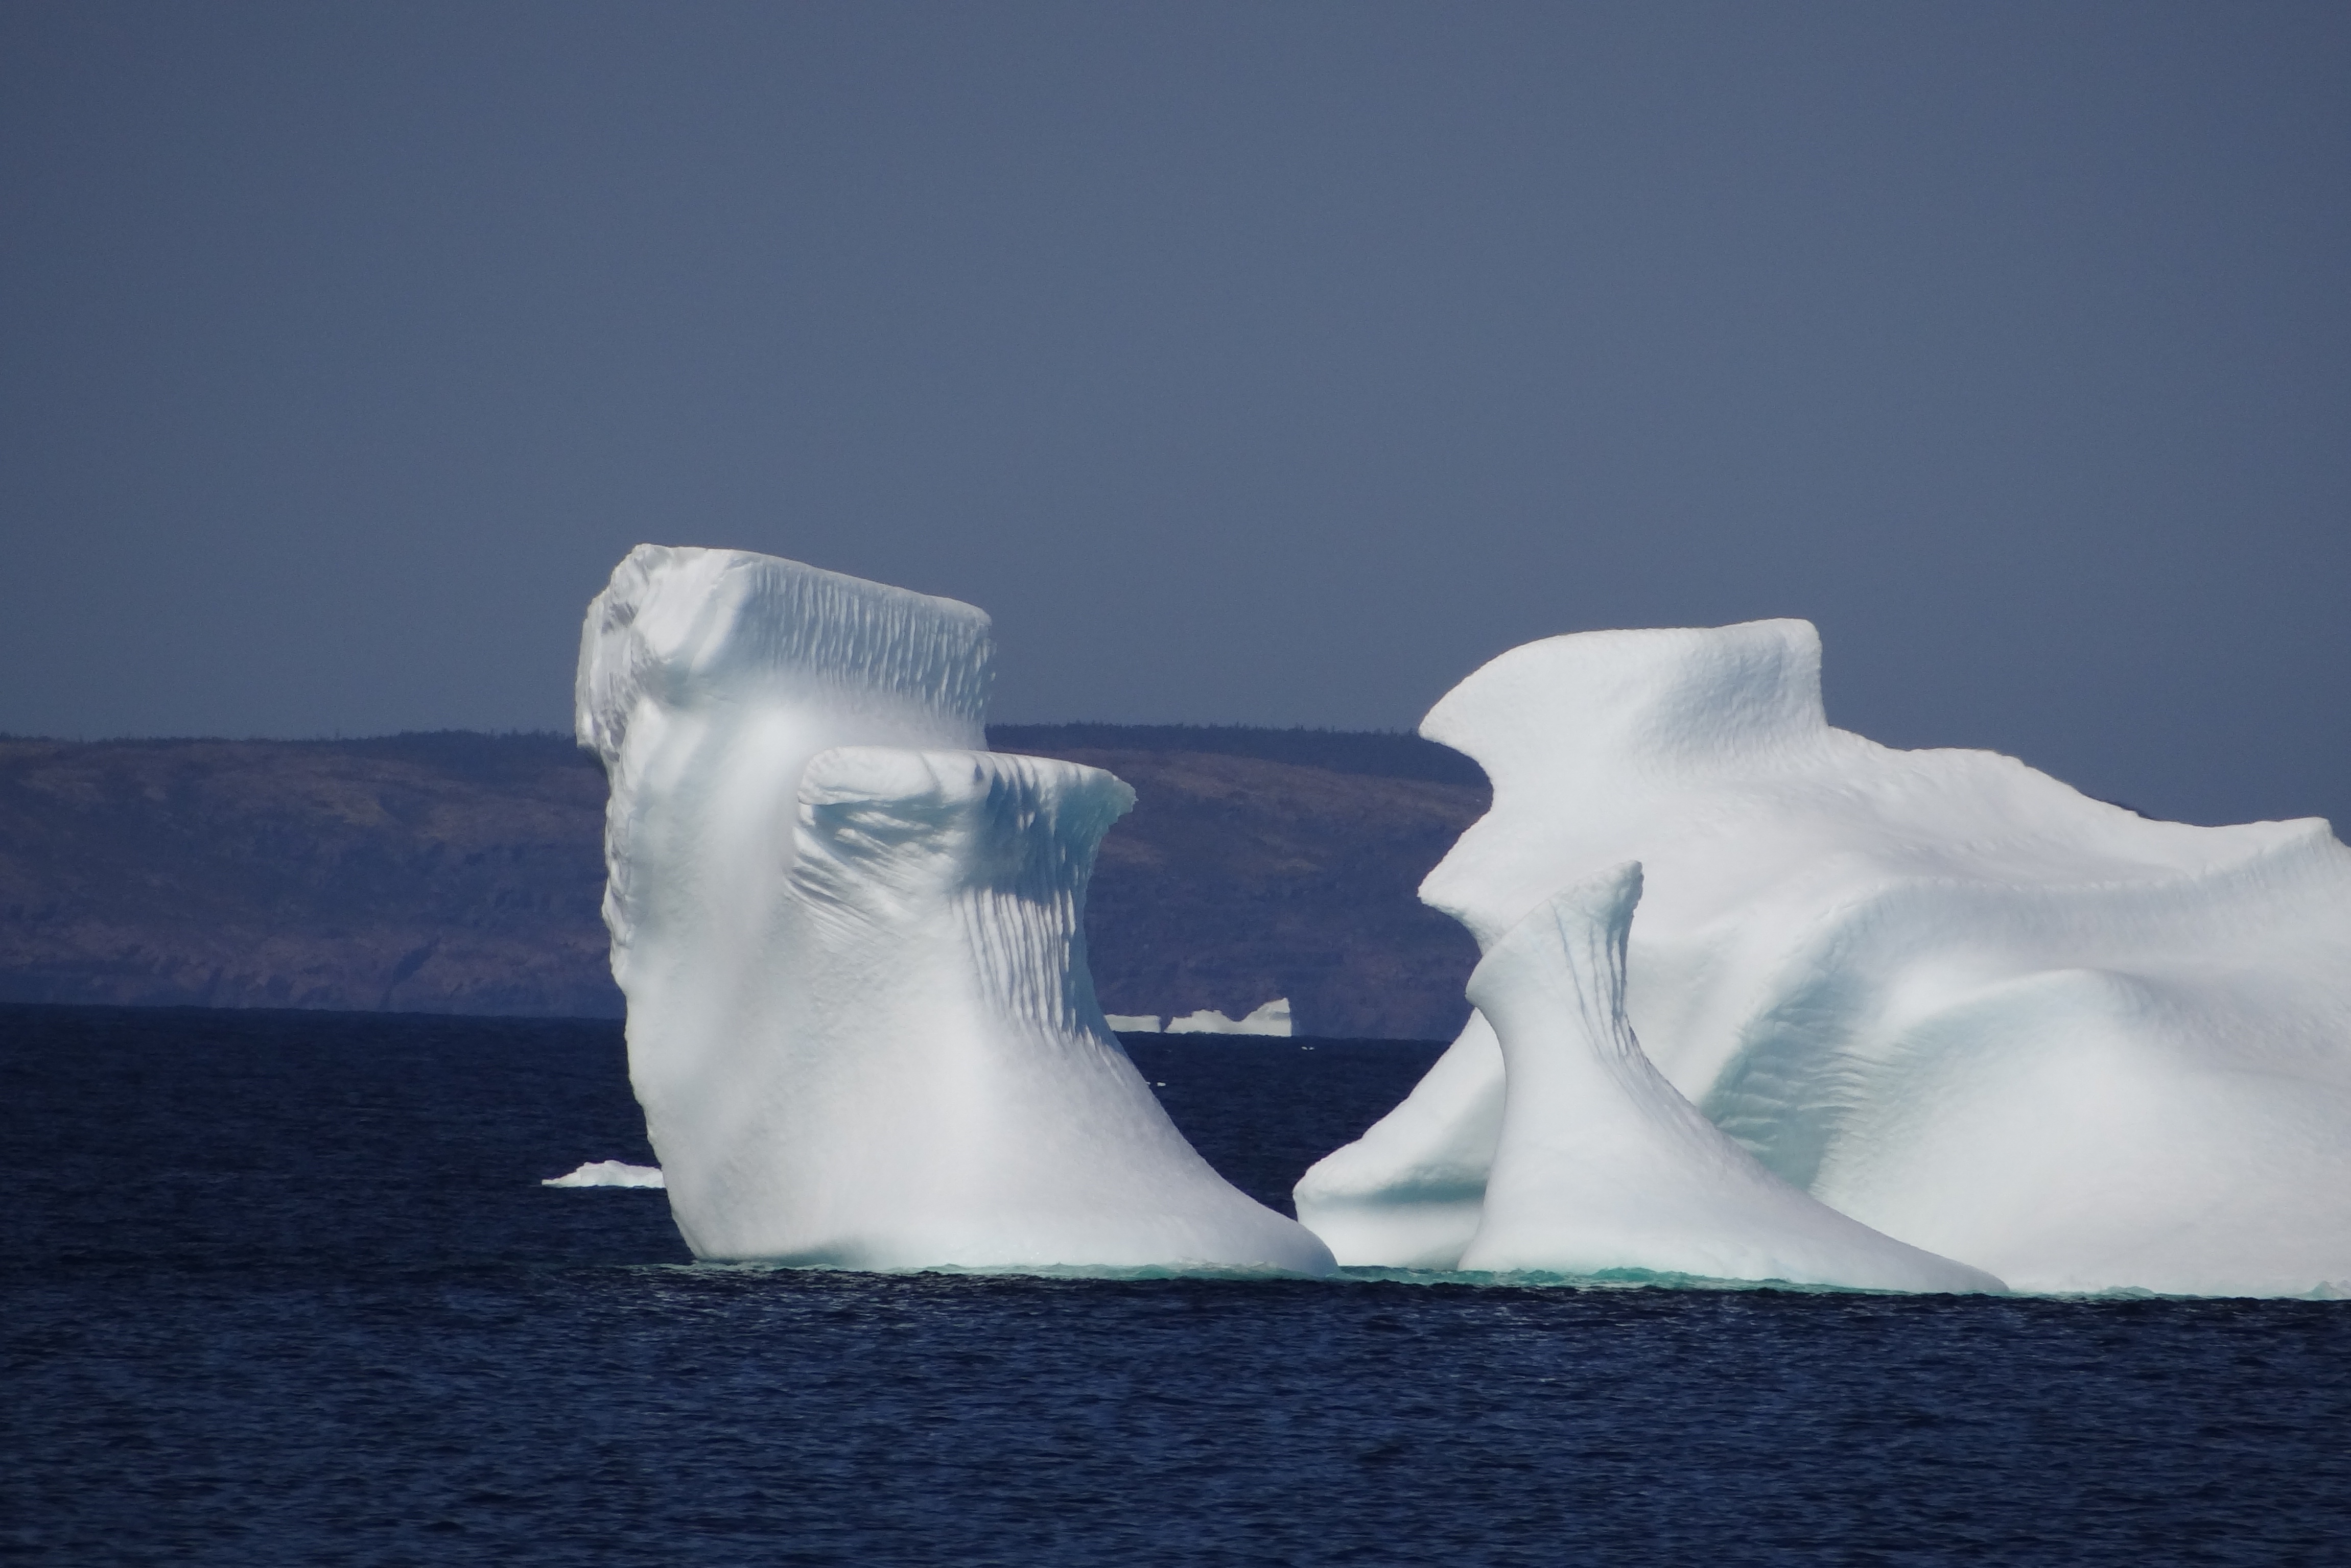 DLR - Earth Observation Center - Tracking Icebergs with TerraSAR-X